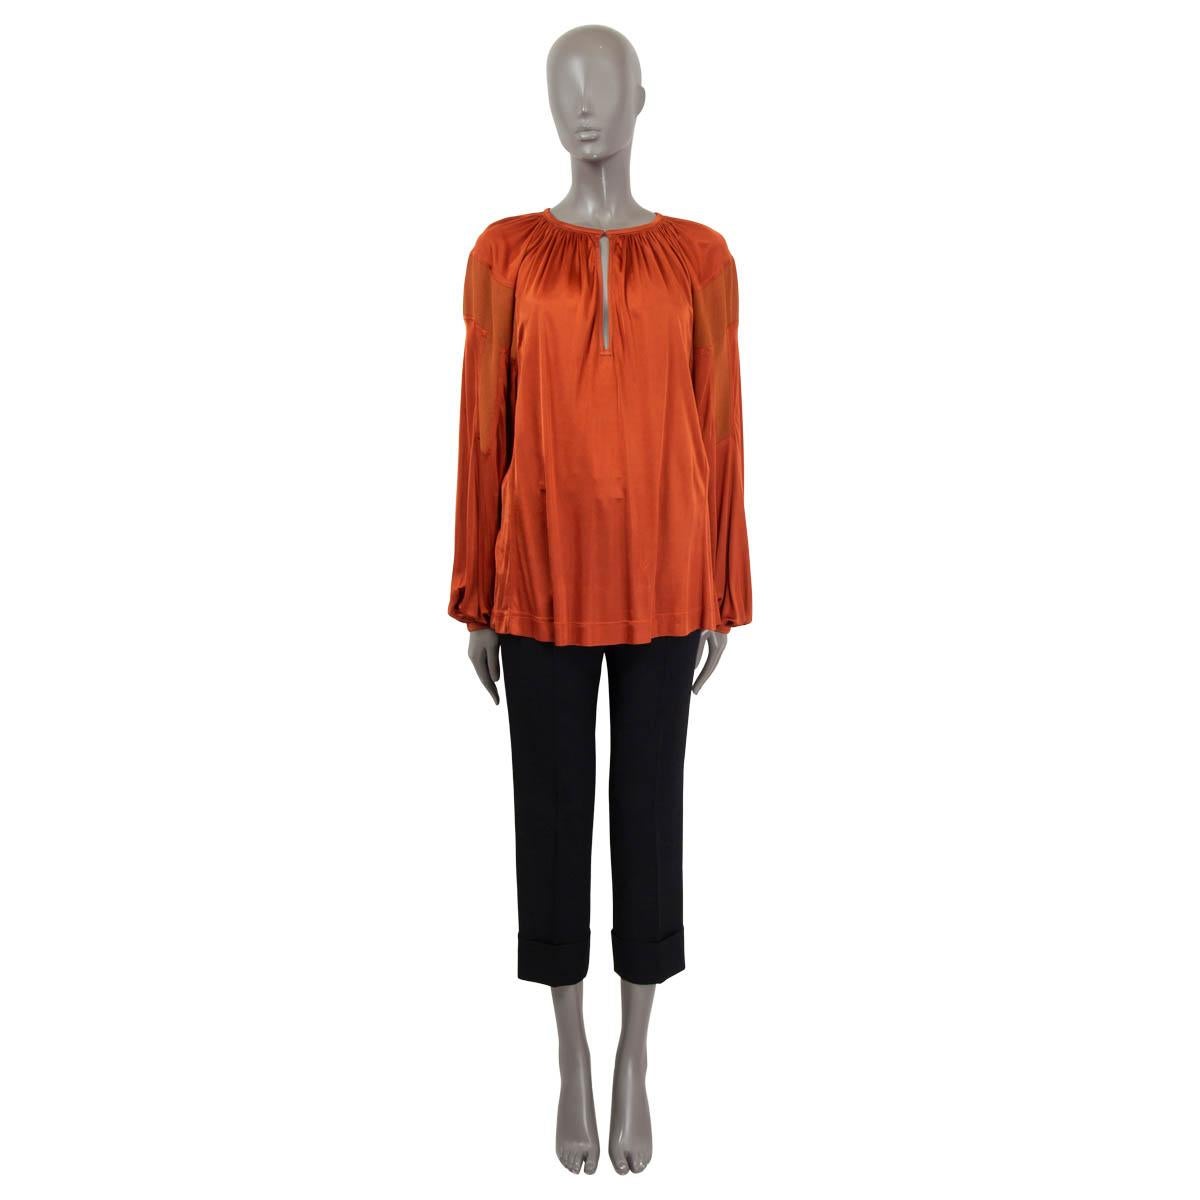 100% authentic Chloé blouse in copper satin jersey viscose (100%) with crepe panels. Features balloon sleeves and a gathered heyhole-neck that closes with a concealed button. Unlined. Has been worn and shows tree small stains on the front. Overall